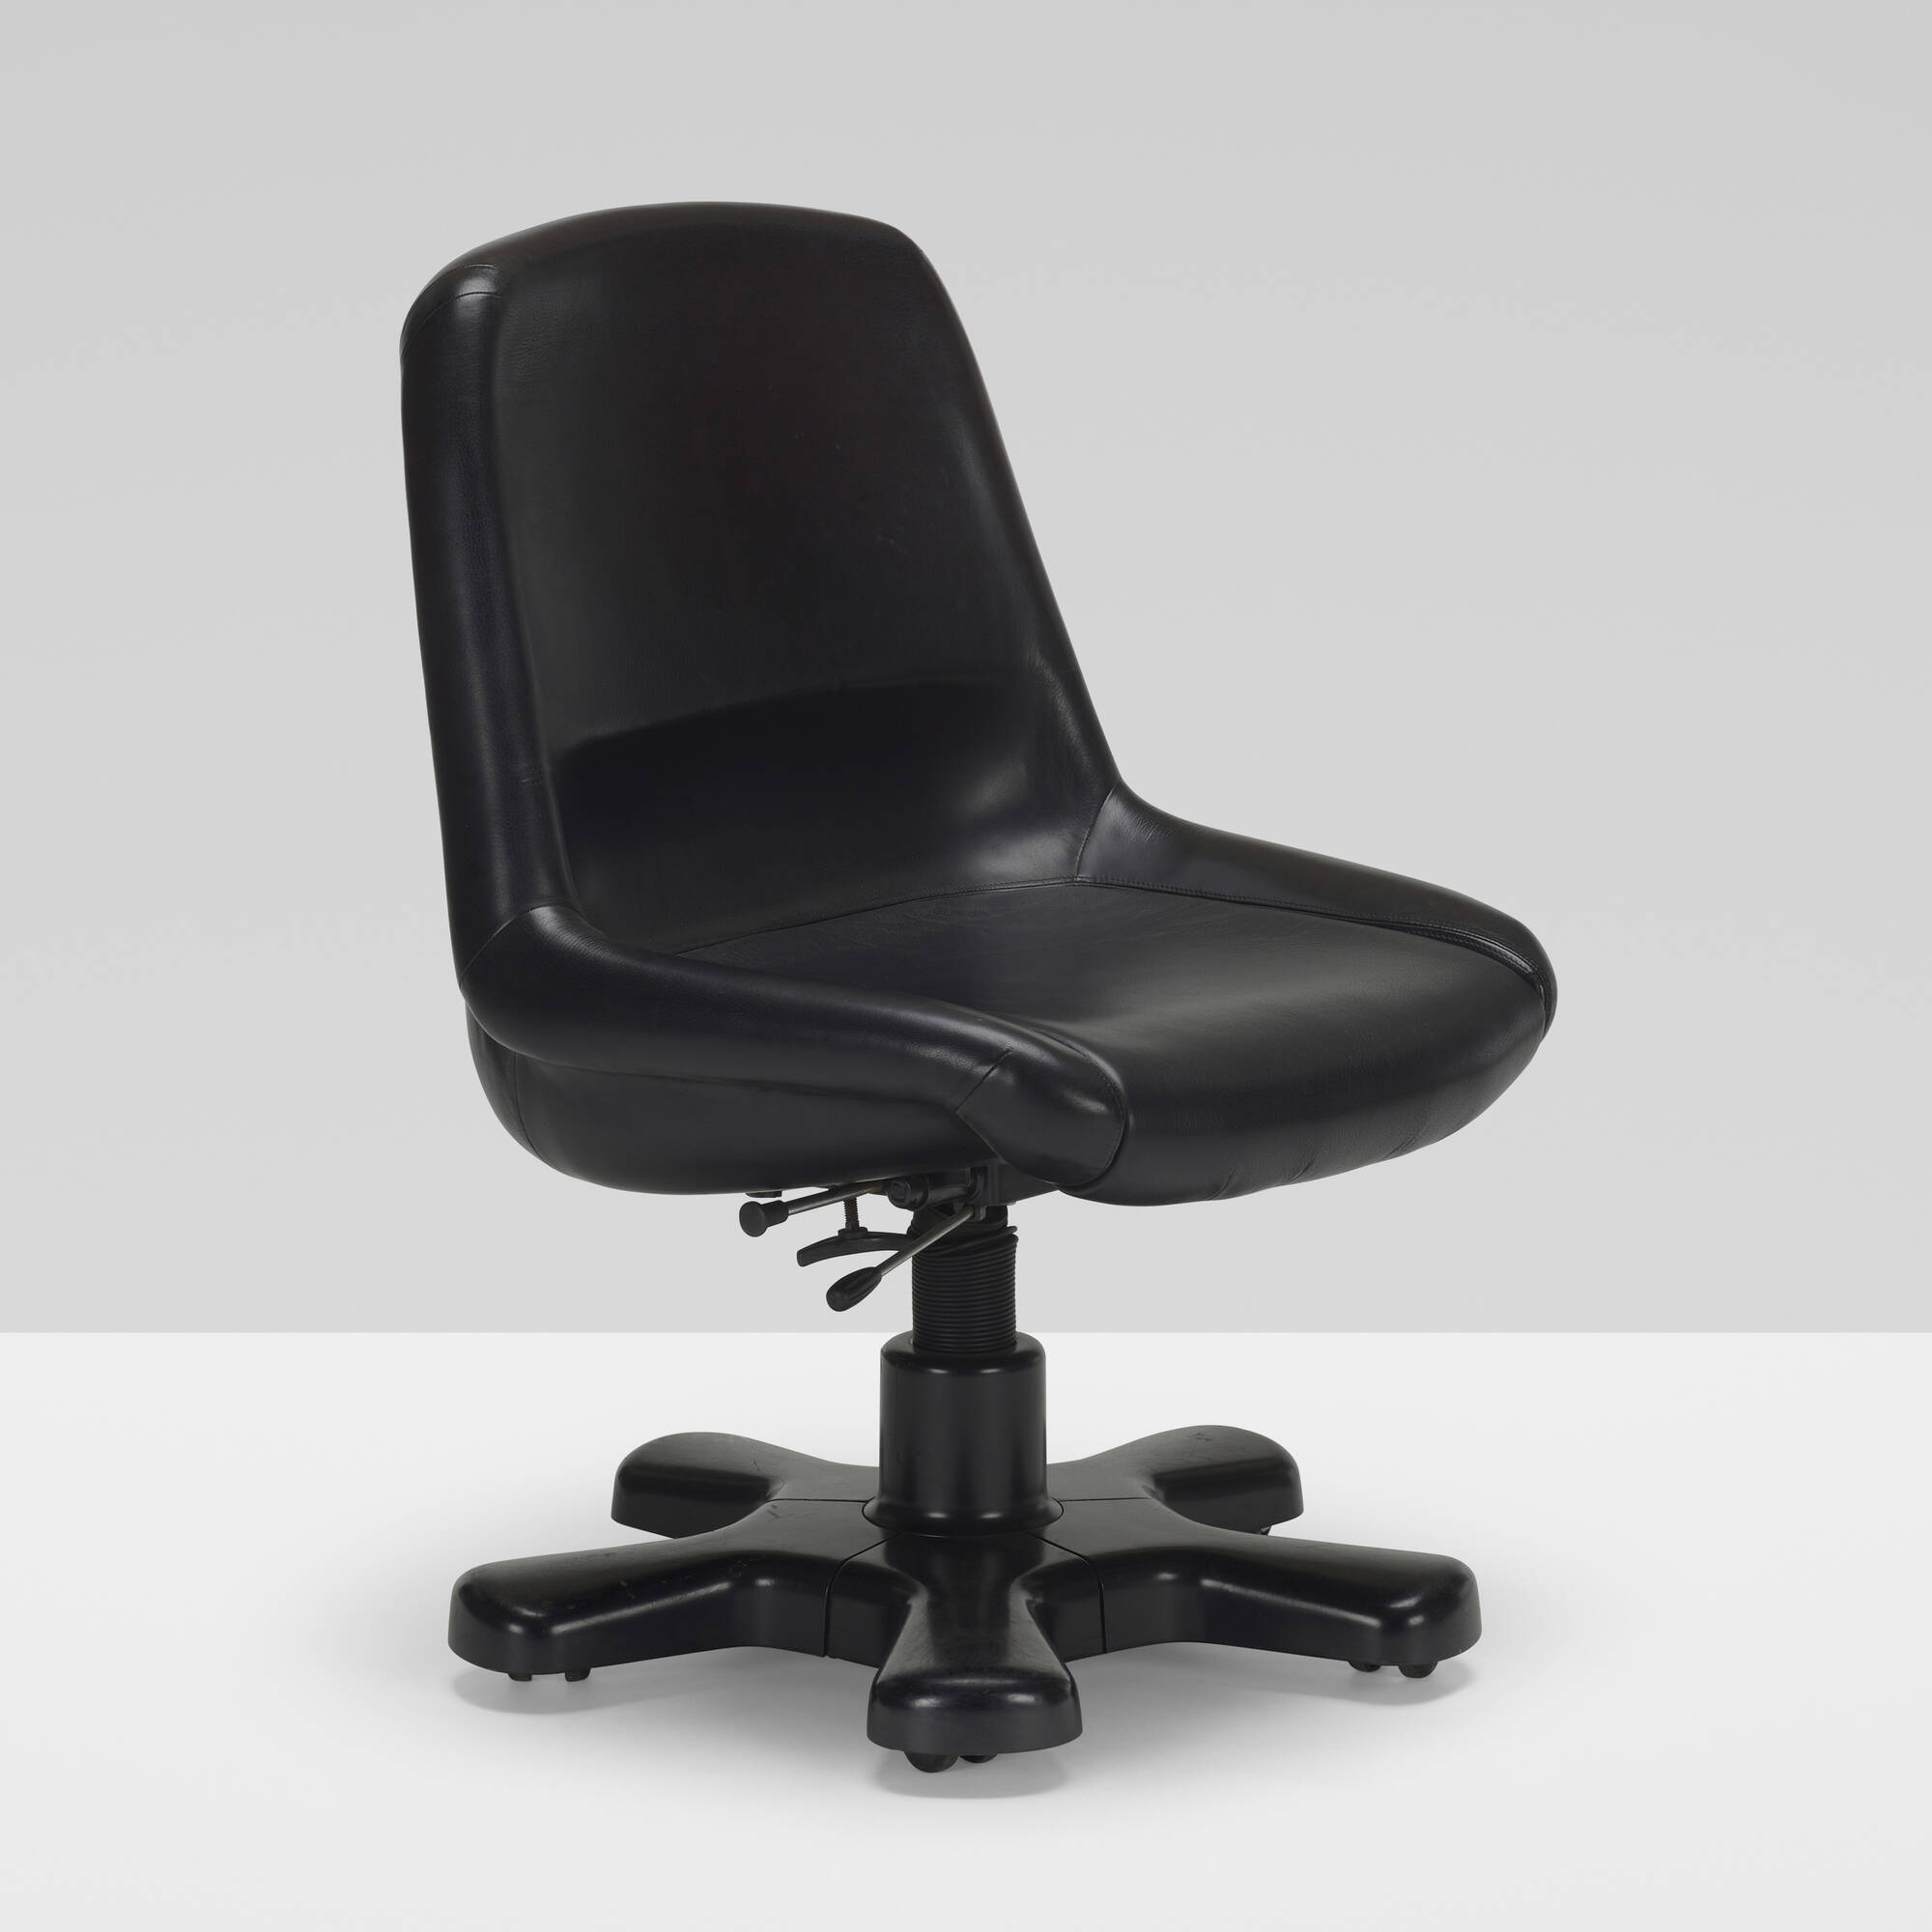 206: ANGELO MANGIAROTTI, Rare office chair < Casati Gallery: Visions of  Italian Design, 10 December 2021 < Auctions | Wright: Auctions of Art and  Design